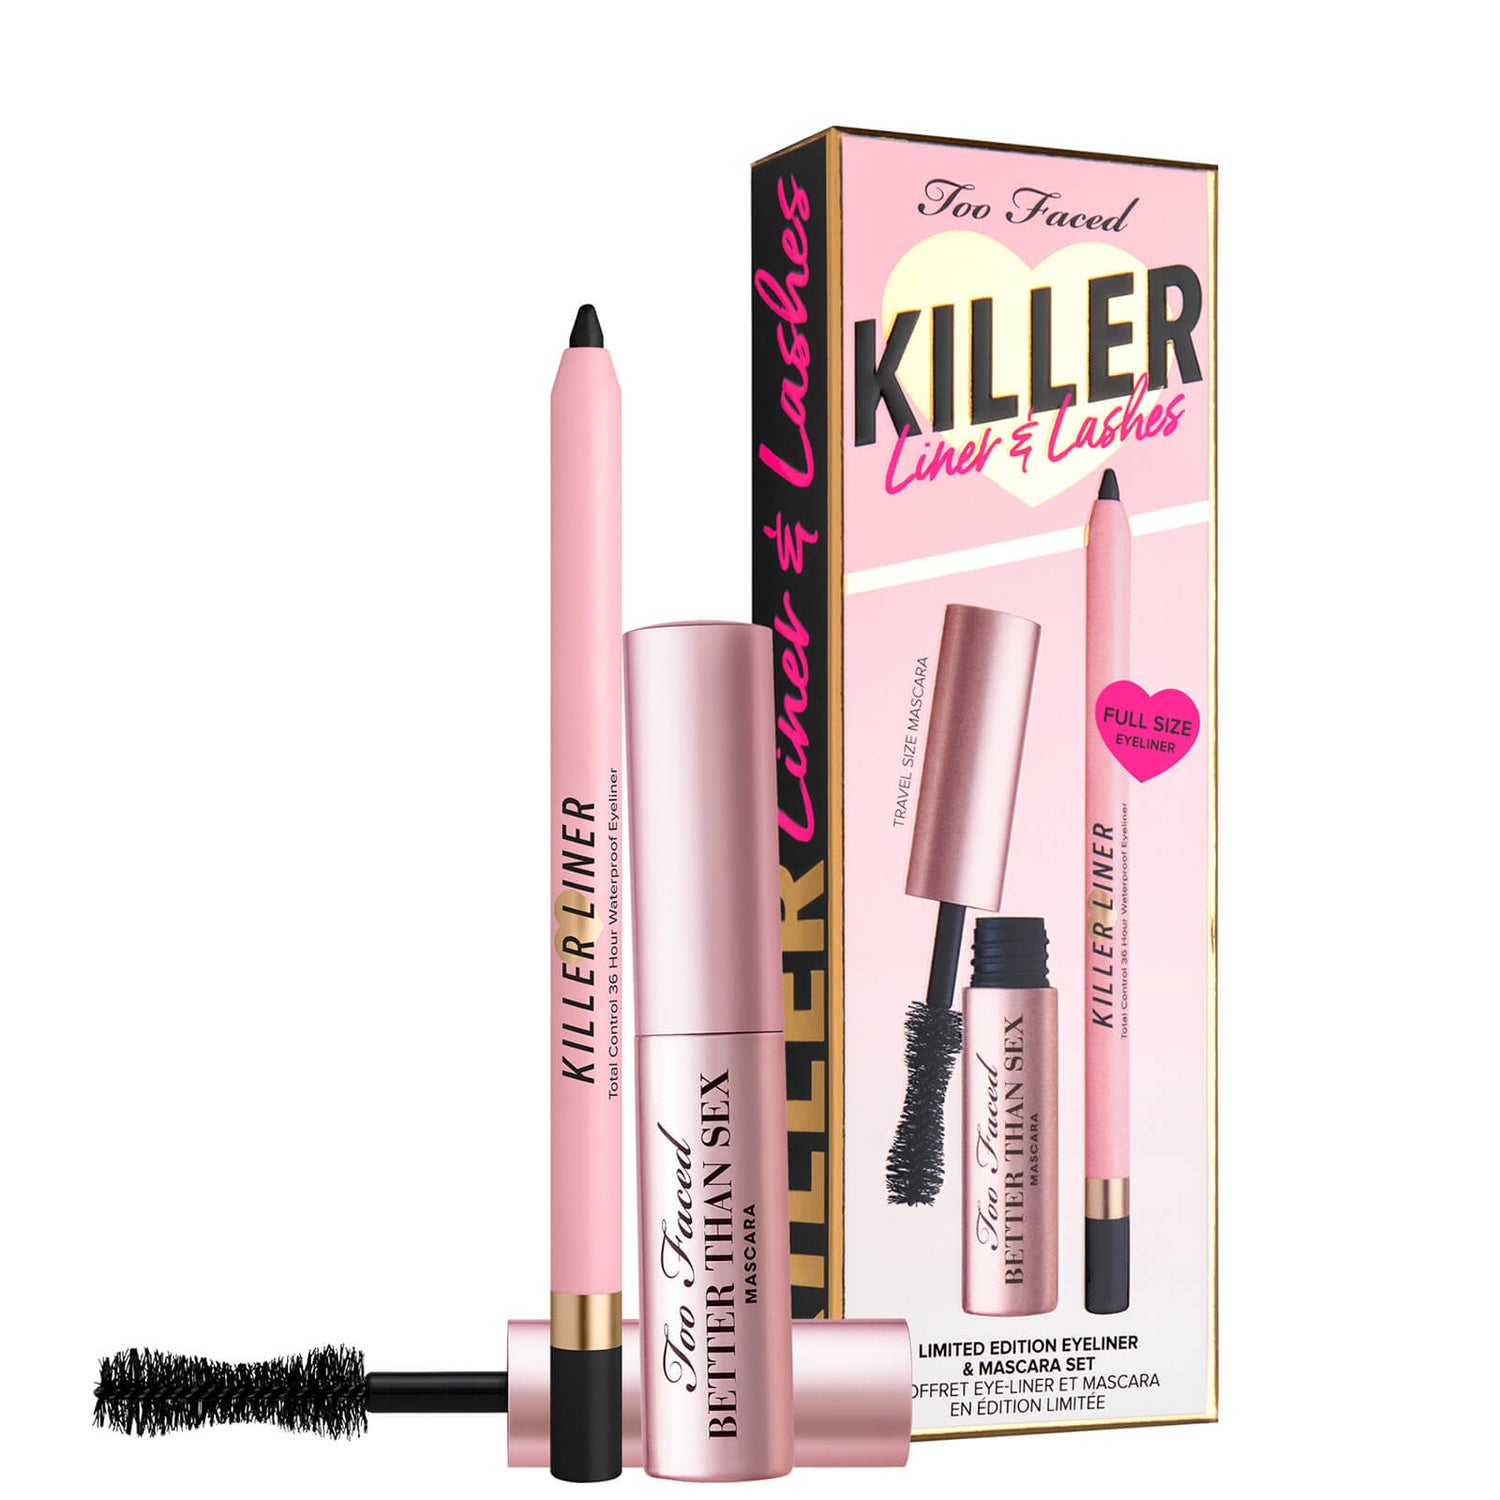 Too Faced Limited Edition Killer Lashes and Liner Mascara and Eyeliner Duo